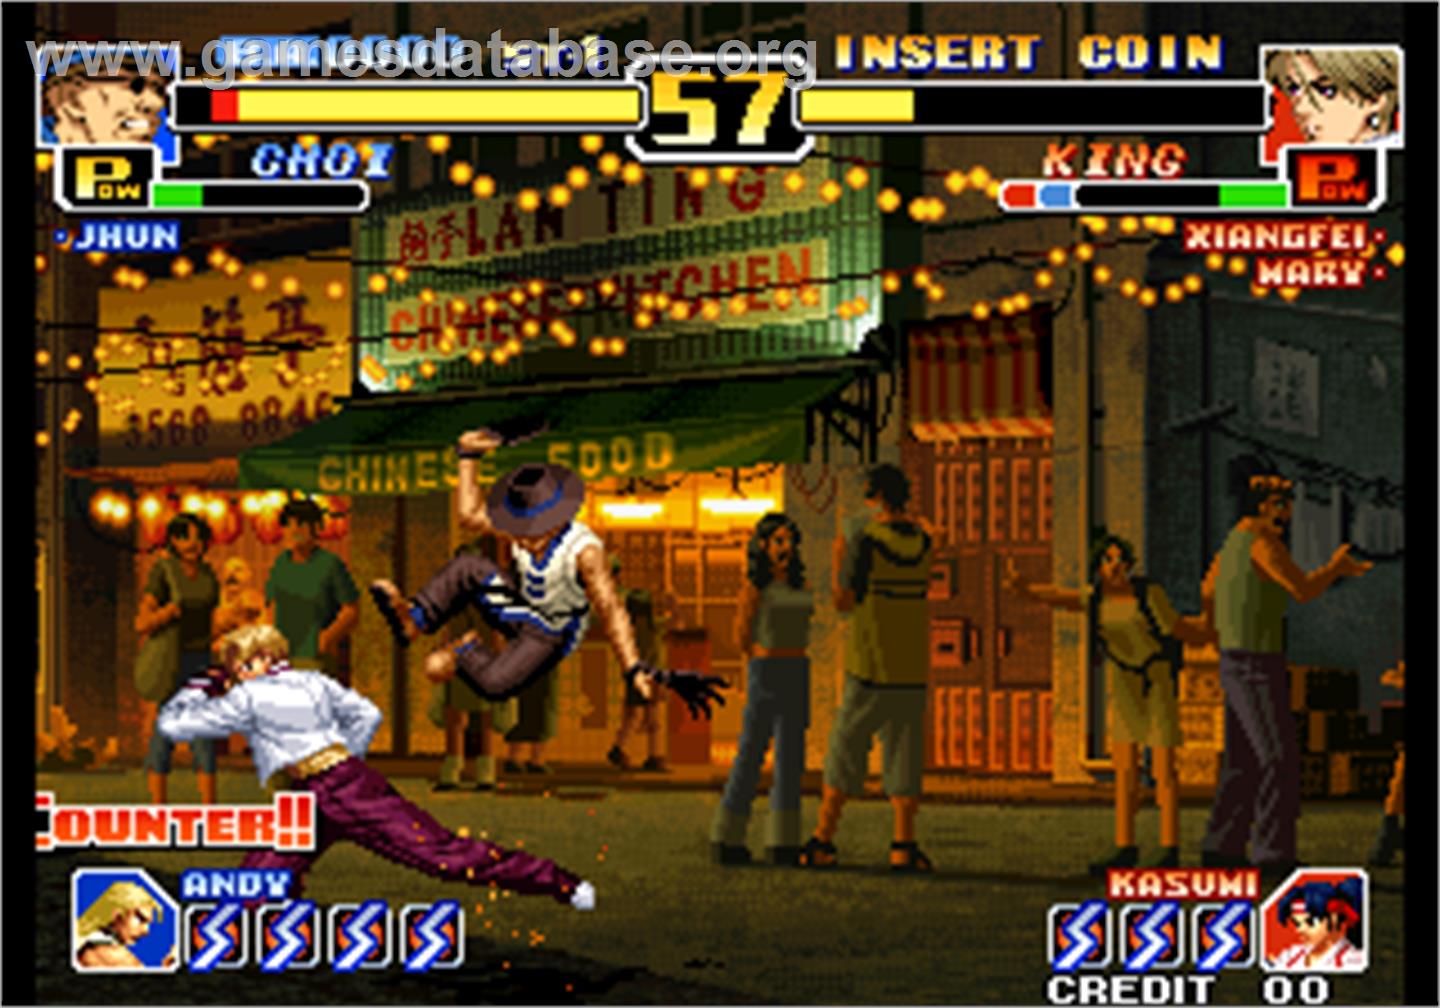 The King of Fighters '99 - Millennium Battle - Arcade - Artwork - In Game